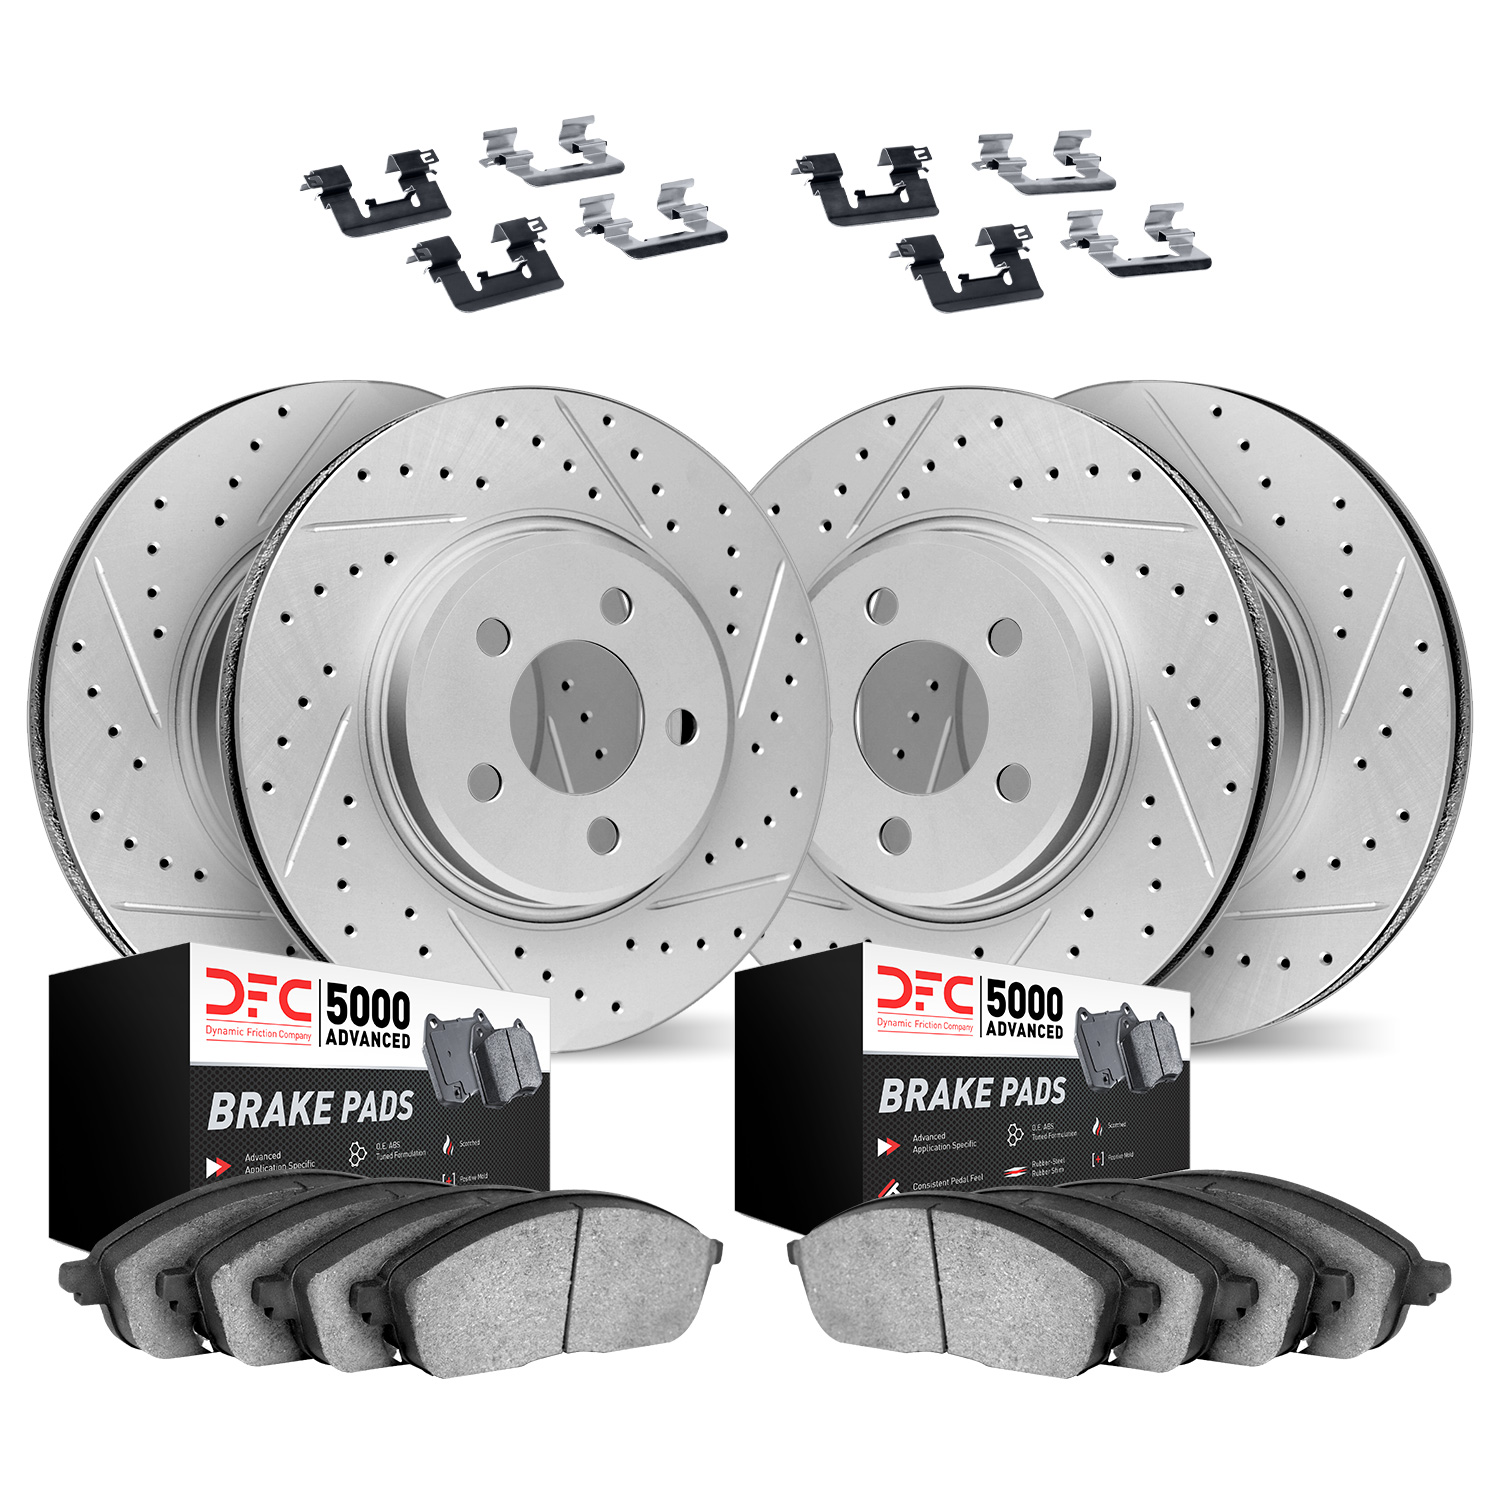 2514-13015 Geoperformance Drilled/Slotted Rotors w/5000 Advanced Brake Pads Kit & Hardware, 2015-2021 Subaru, Position: Front an